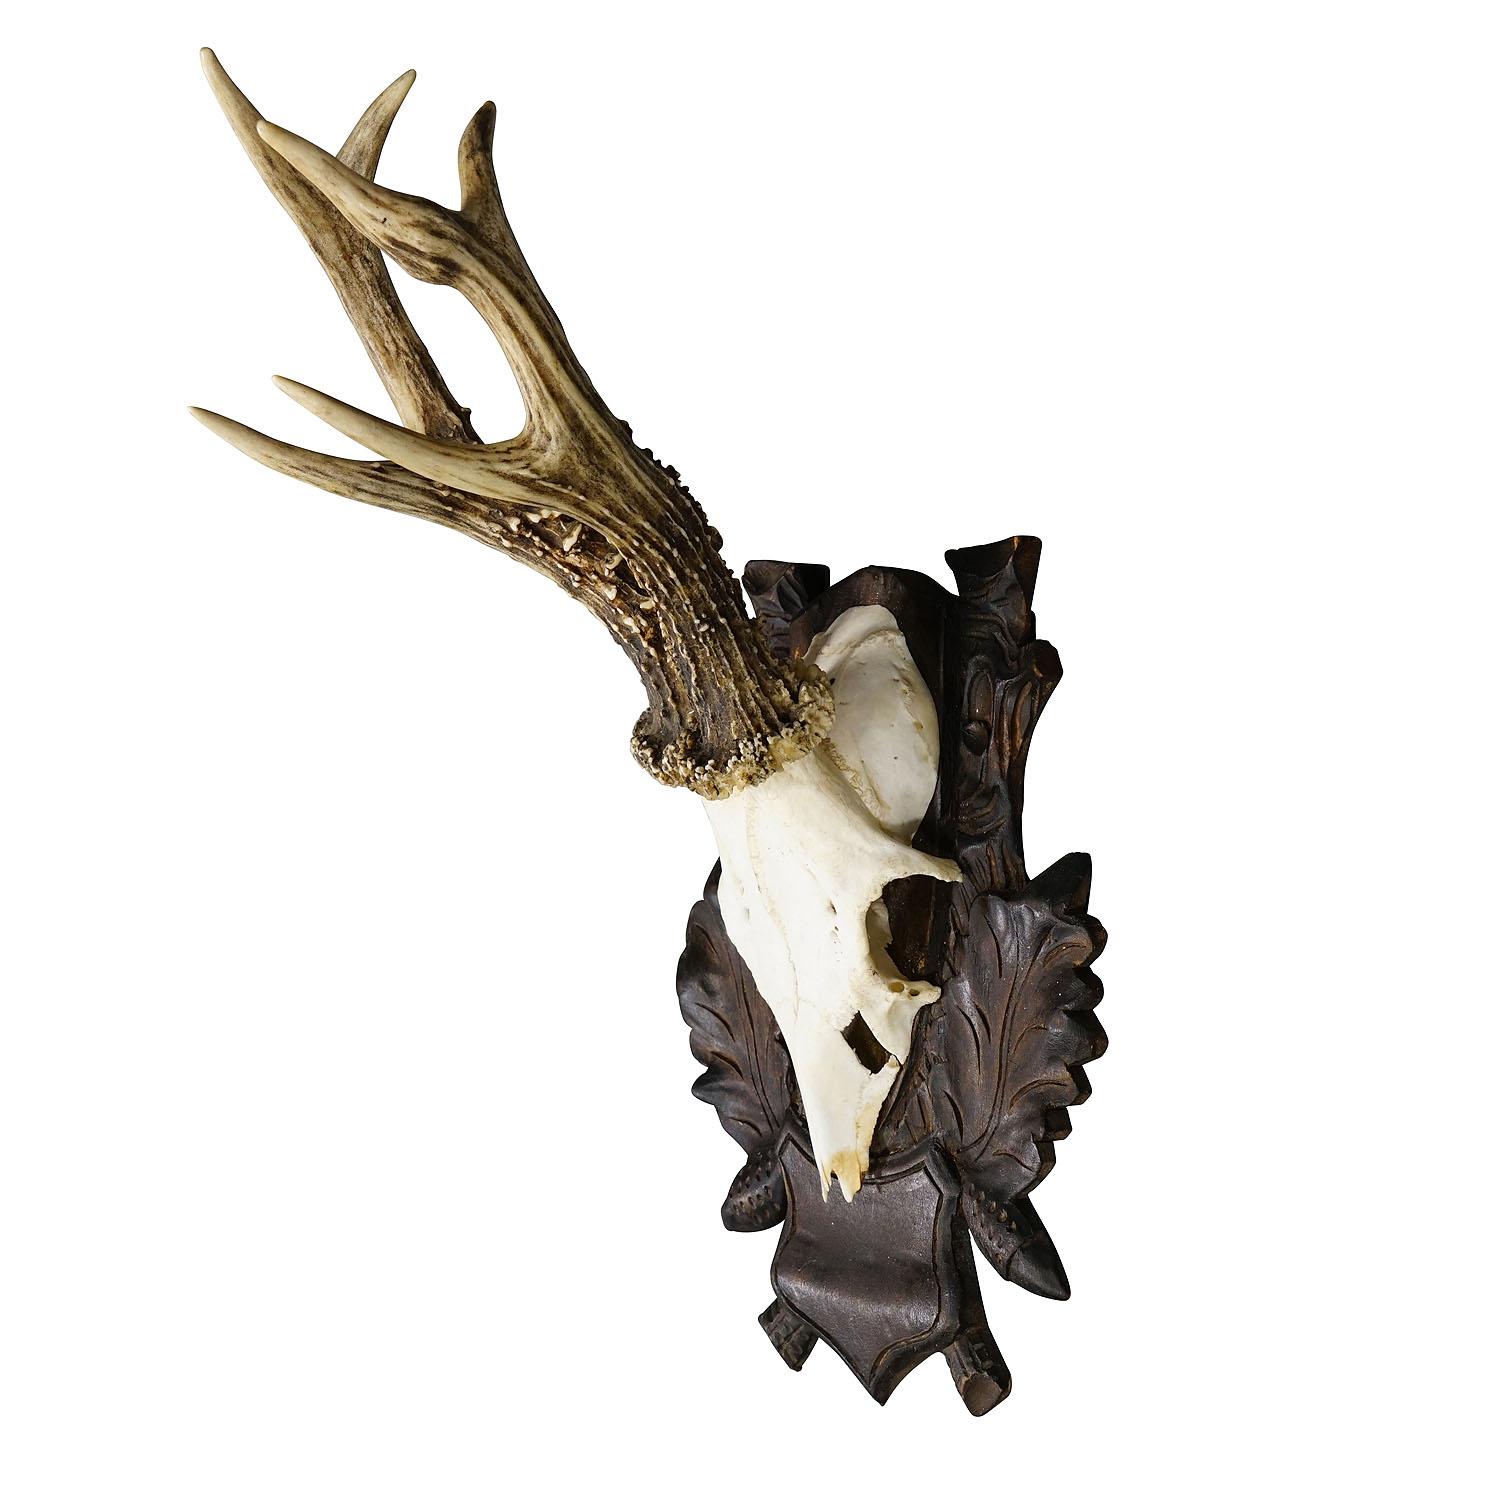 Large Black Forest Roe Deer Trophy on Carved Plaque 1970s

A great vintage roe deer (Capreolus capreolus) trophy on a wooden carved plaque. The trophy was shot in 1975. Good condition.

Trophies are mementos from the hunted game, which are kept by